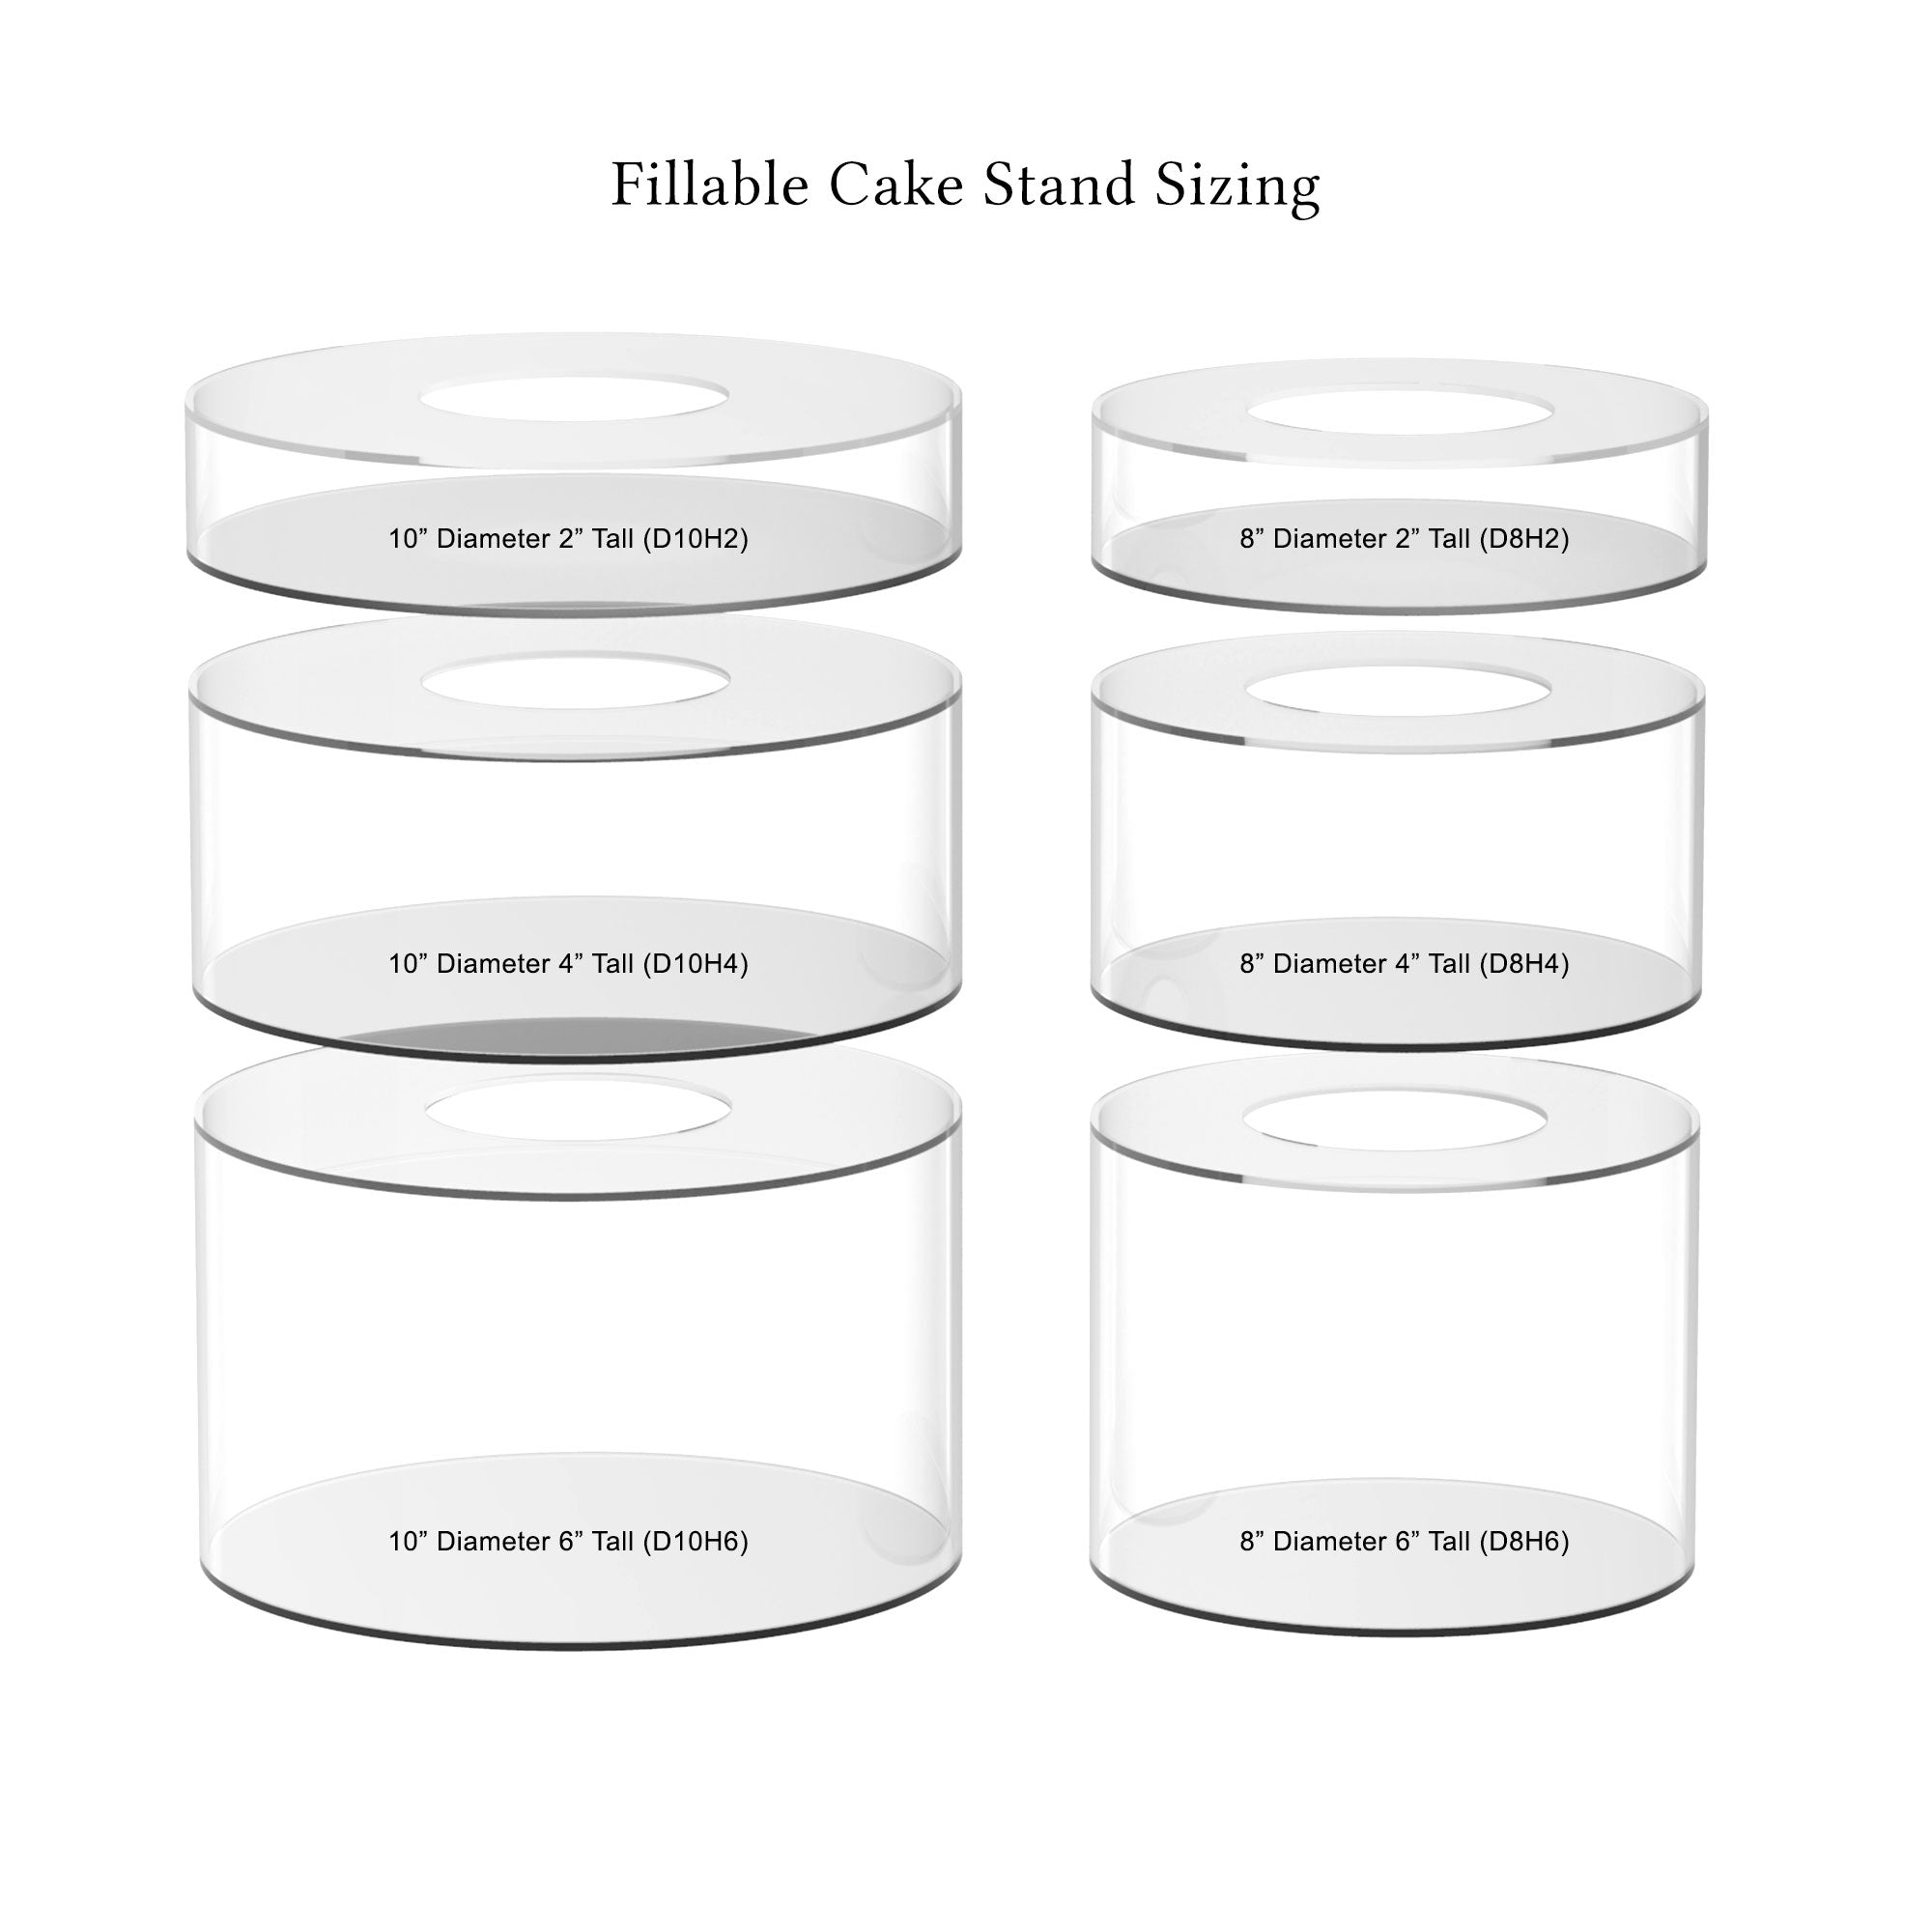 Lacupella Acrylic Fillable Cake Stand, Raiser and Enhancer for Cake Display - 8 inch Diameter